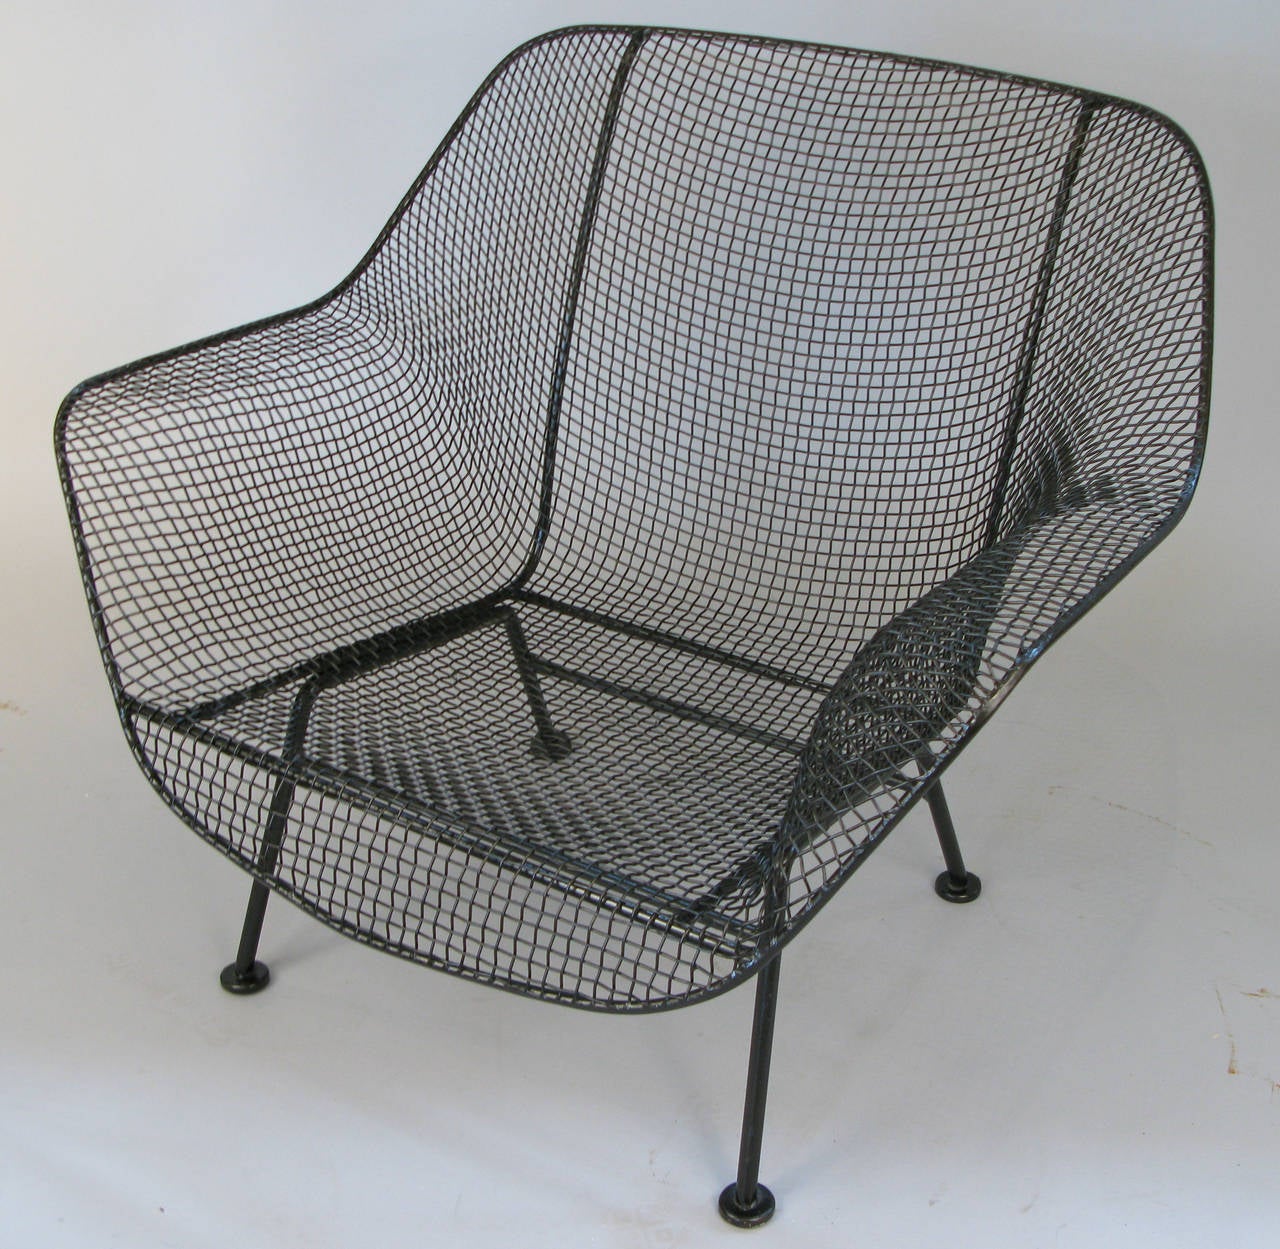 A pair of Russell Woodard's iconic Sculptura lounge chairs in wrought iron and woven steel mesh. Beautiful proportions in these wide and deep lounge chairs make them very comfortable and stylish. Finished in satin black, or can be finished in color